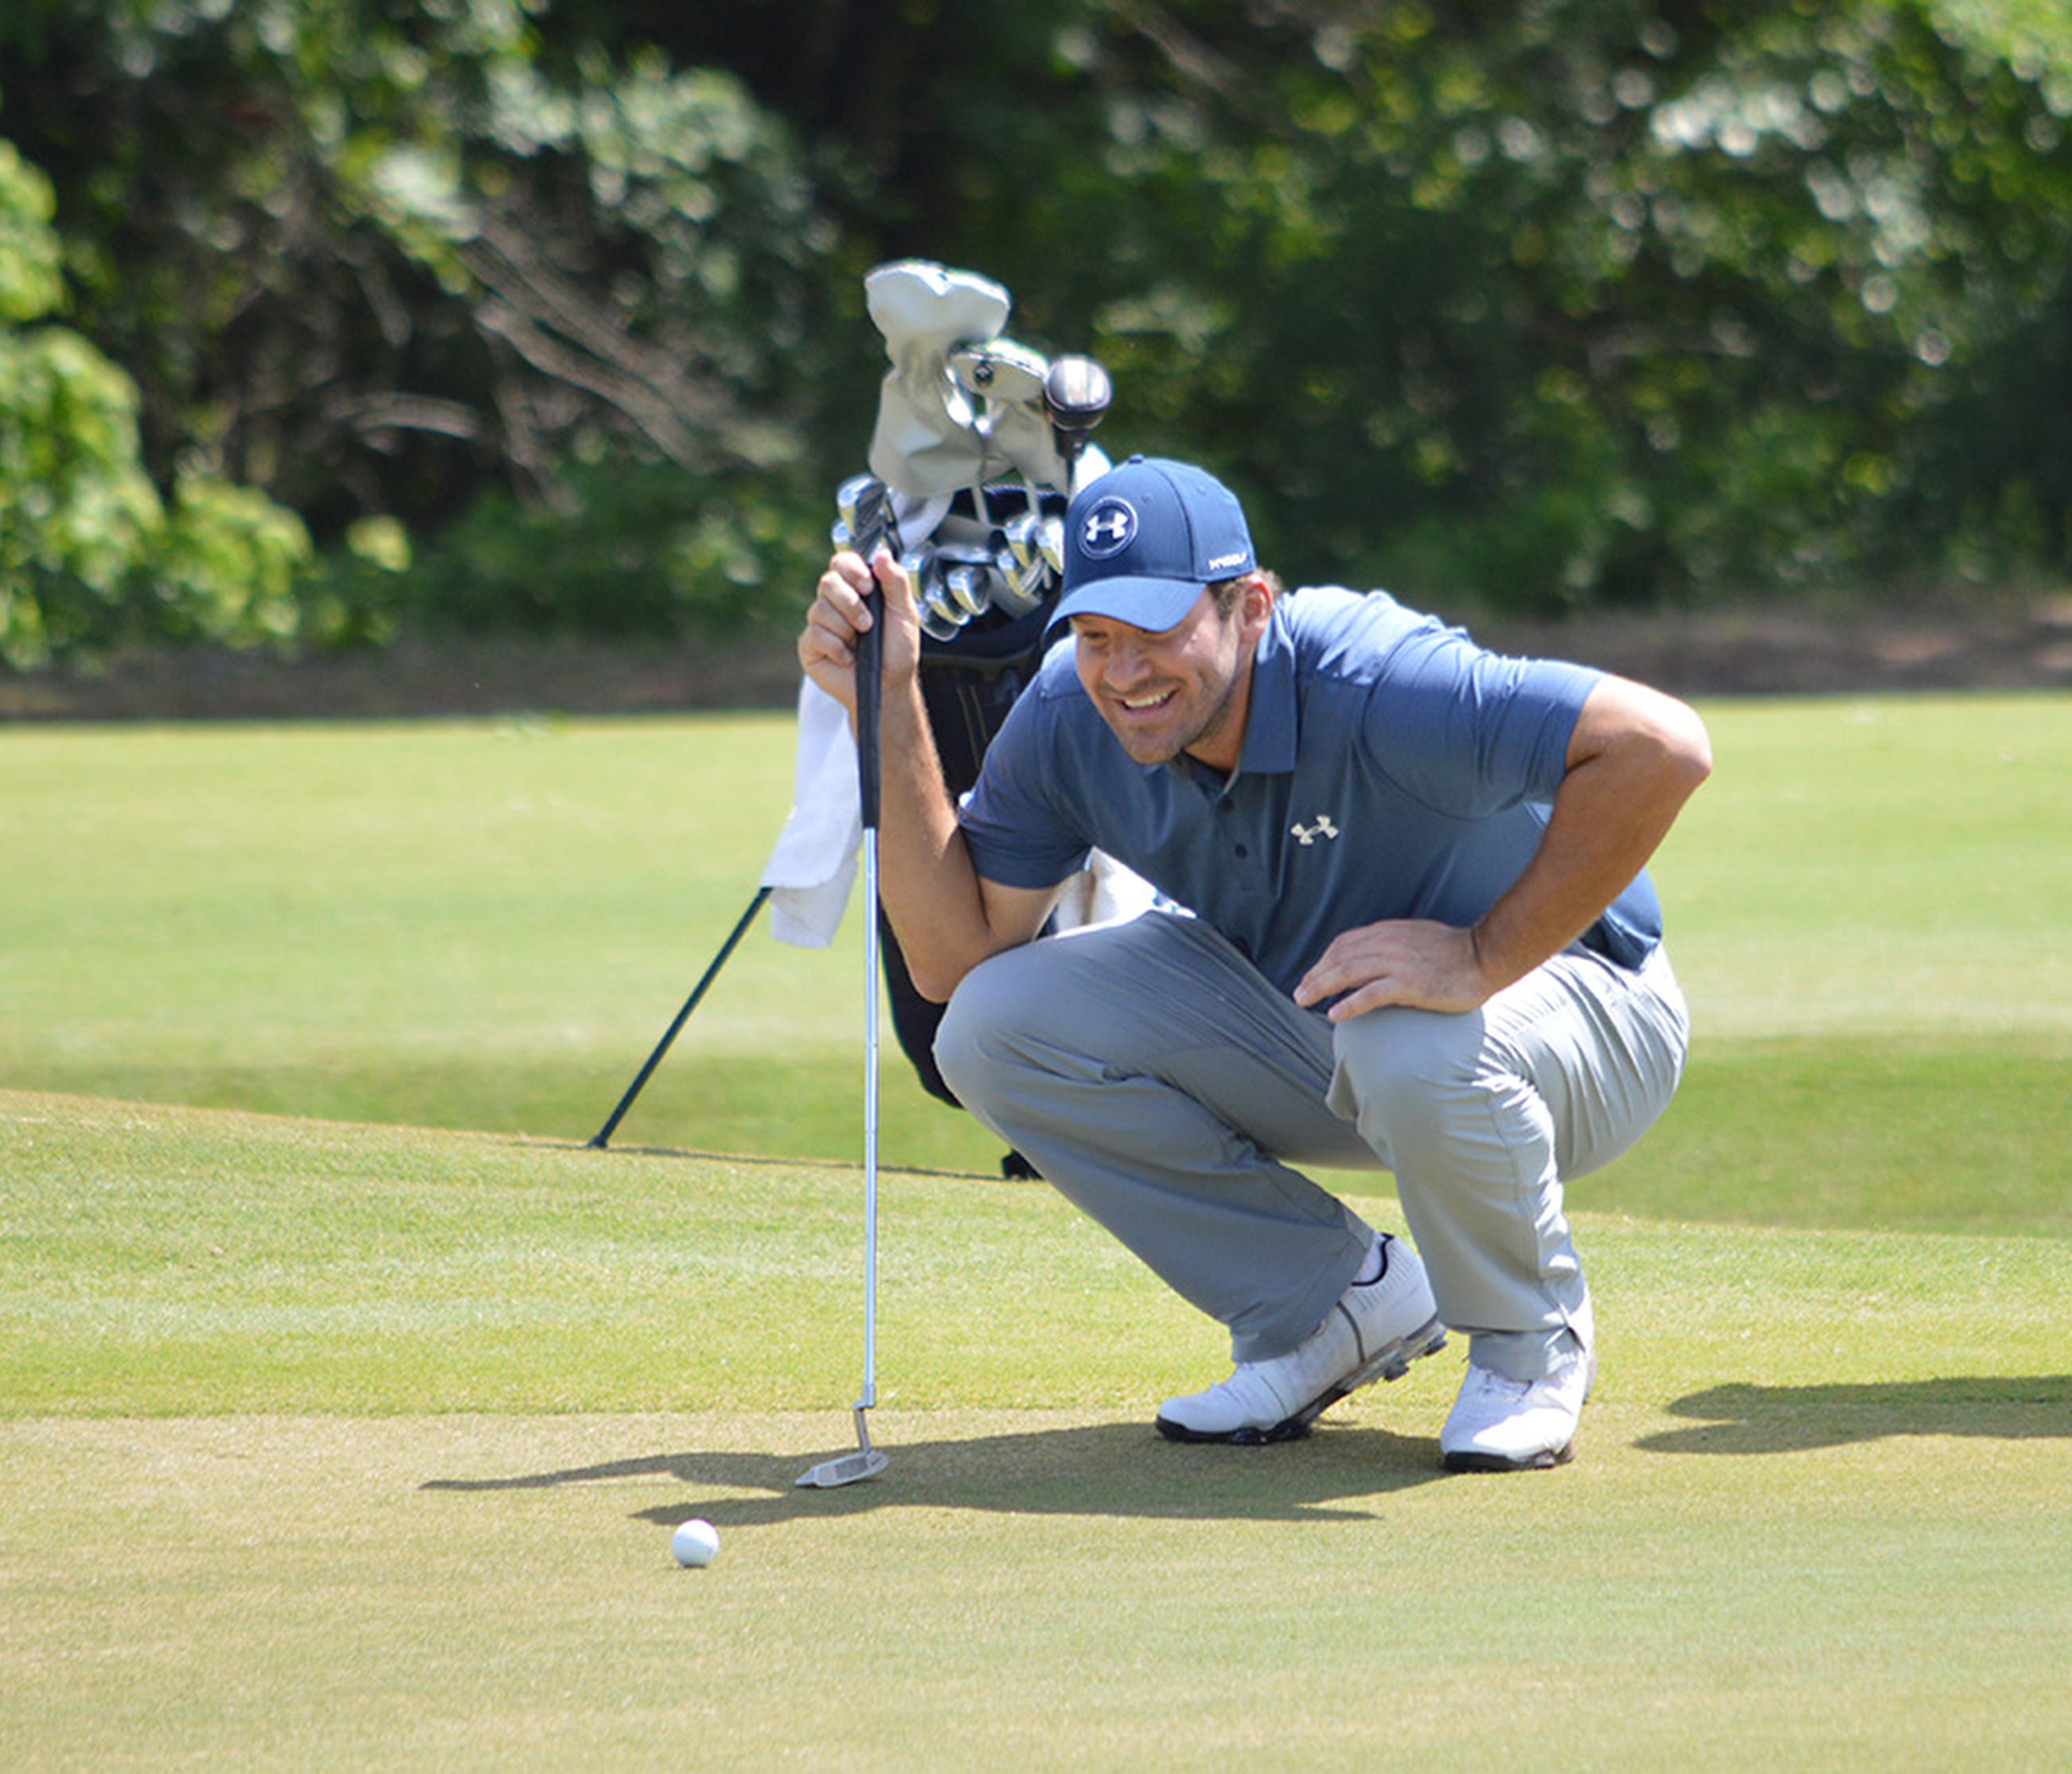 Former Dallas Cowboys quarterback Tony Romo during a qualifying round for the U.S. Open at Split Rail Links & Golf Club in Aledo, Texas, Monday May 8, 2017. [Via MerlinFTP Drop]